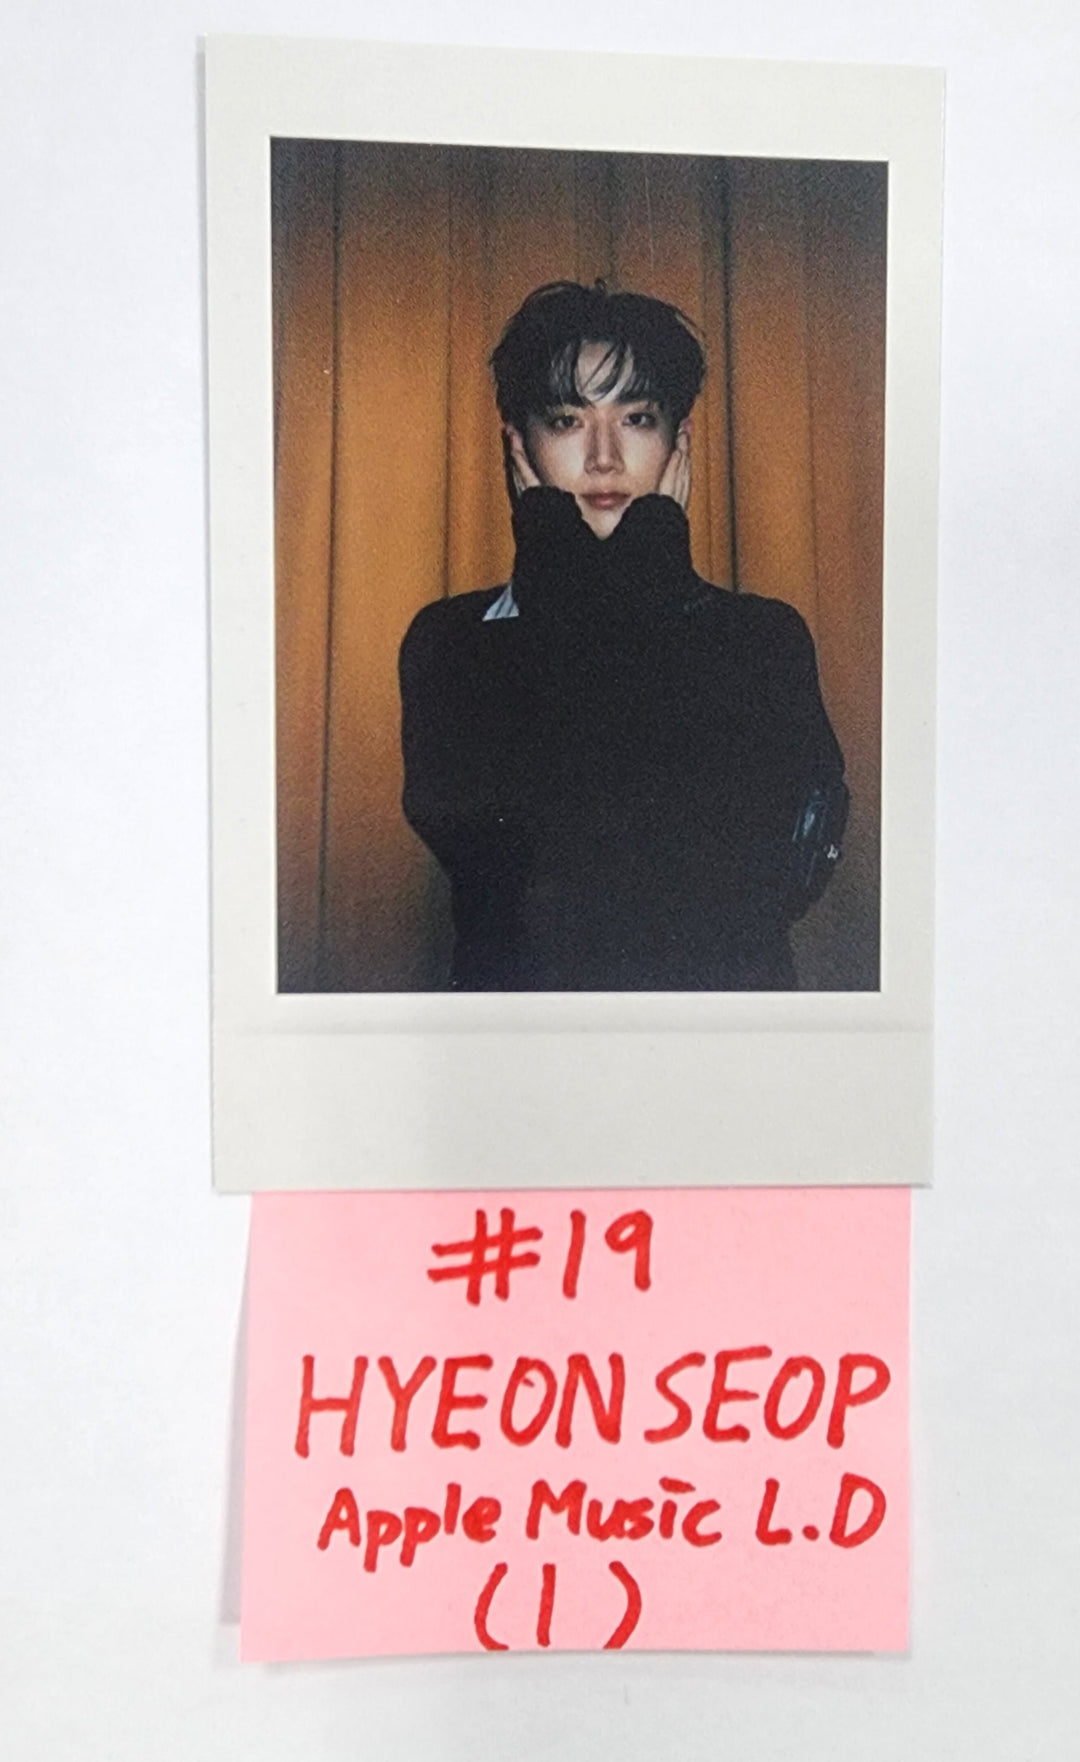 TEMPEST "폭풍속으로" - Apple Music Lucky Draw Event Photocard [23.09.21]